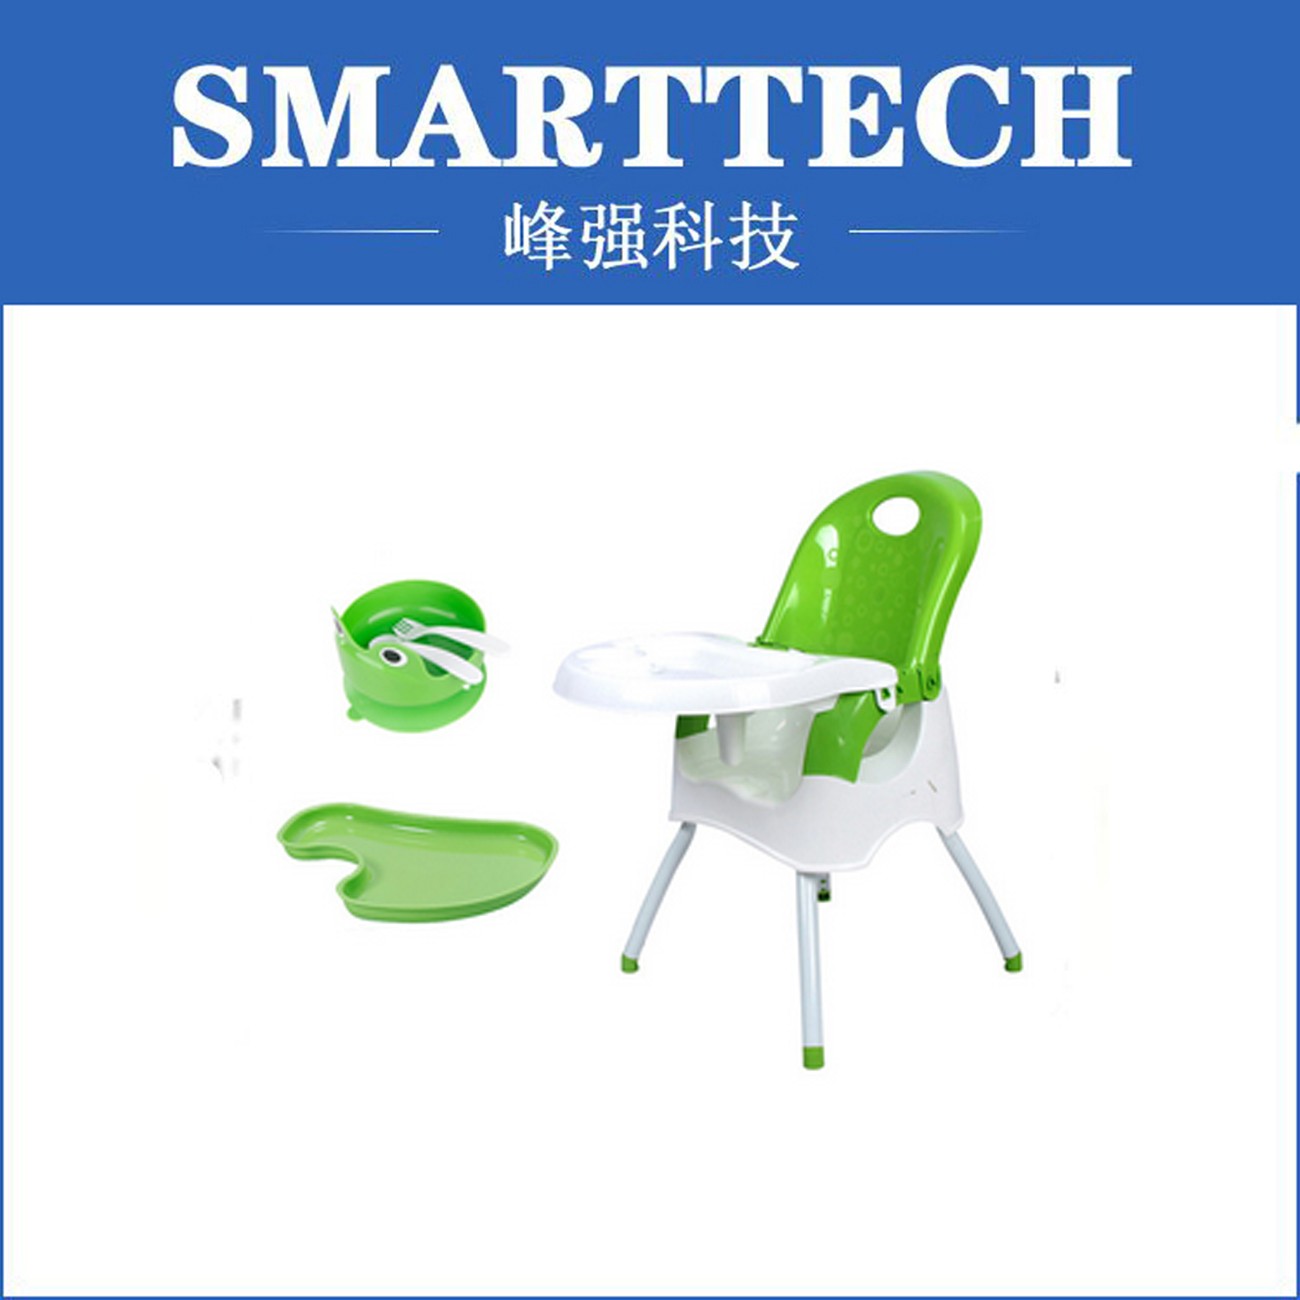 plastic Chair for baby care.jpg